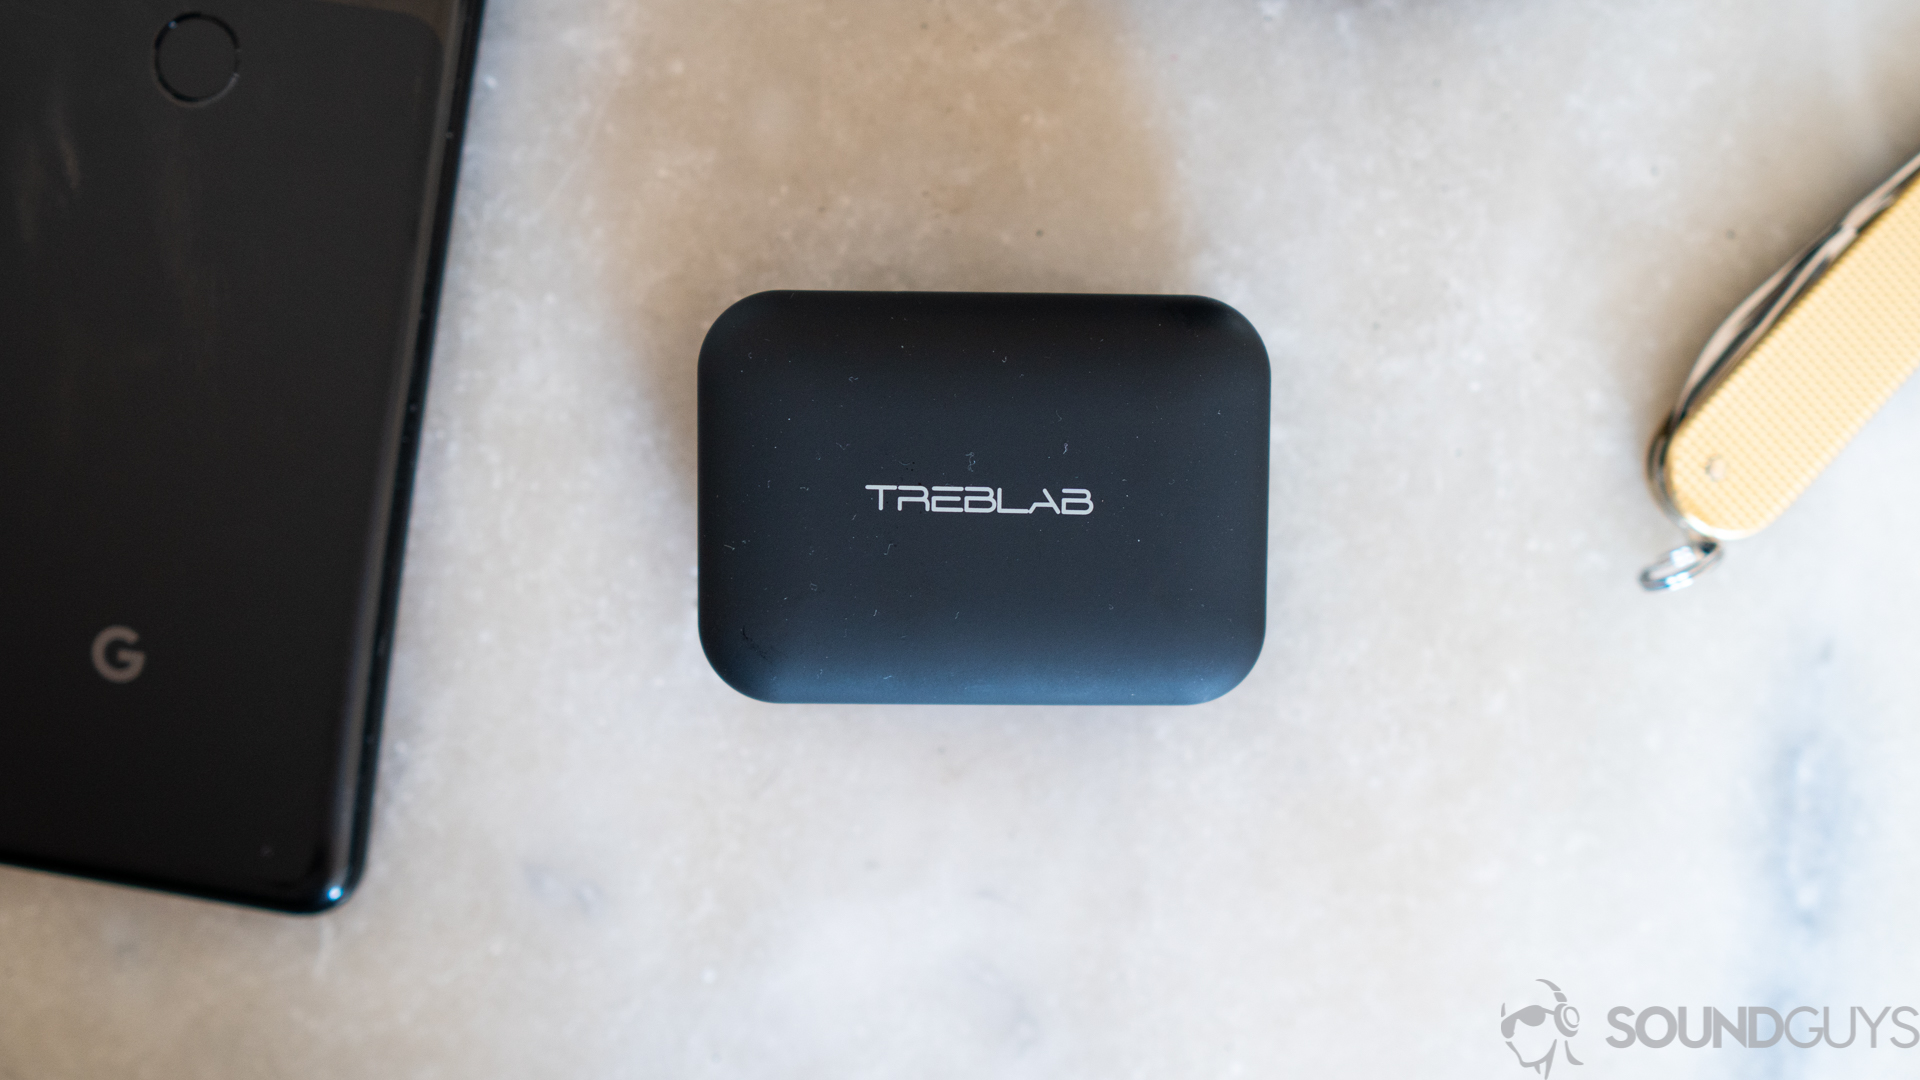 A photo of the Treblab X5 in its carrying case, resting atop a table, next to a Google Pixel phone and pocketknife.